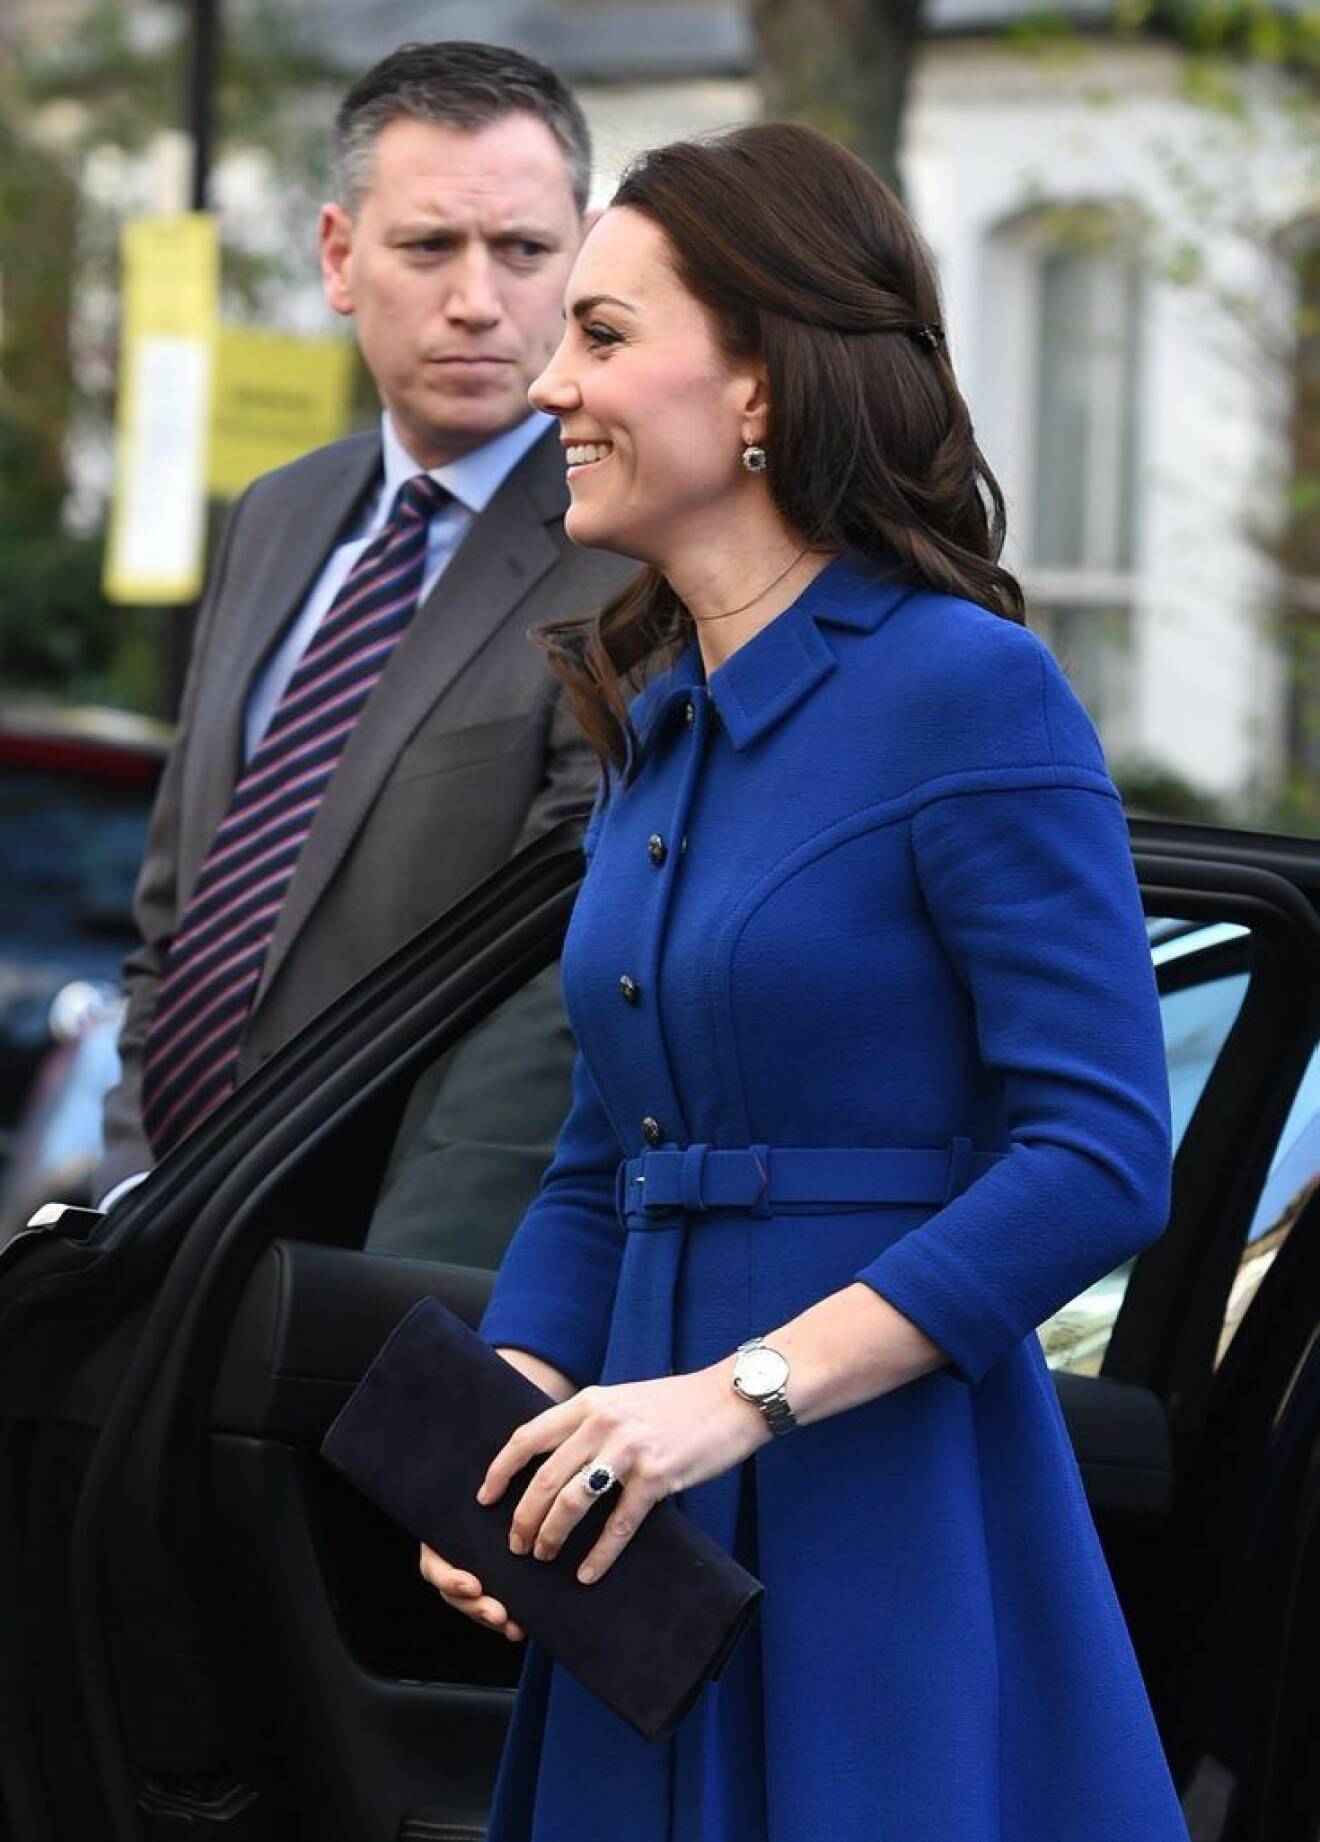 11 January 2017. The Duchess of Cambridge visits the Anna Freud Centres Early Years Parenting Unit, held at 38 Mayton Street, London. at Here: Catherine, The Duchess of Cambridge Credit: Justin Goff/GoffPhotos.com Ref: KGC-03 COPYRIGHT STELLA PICTURES